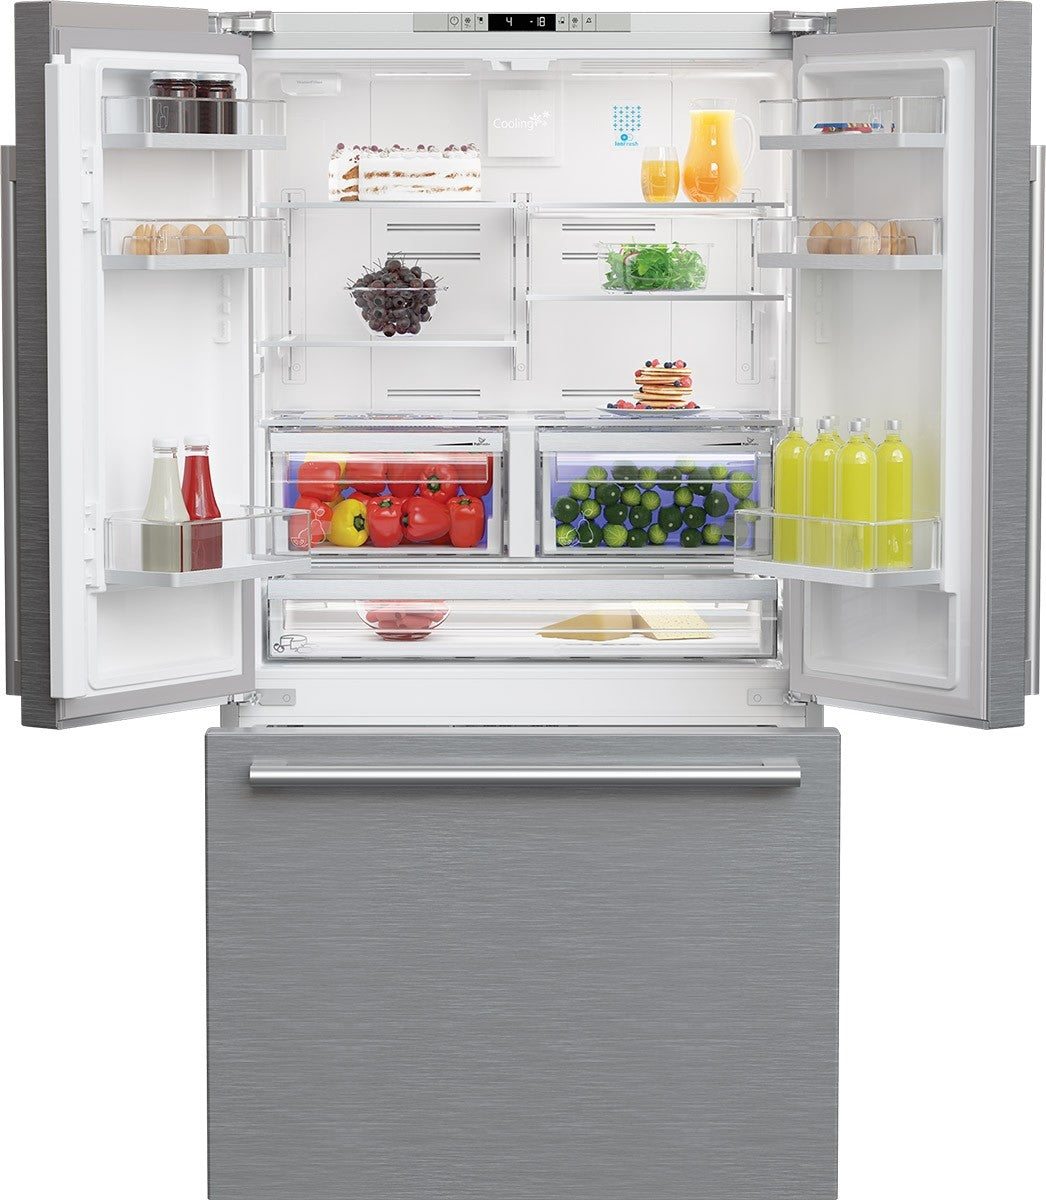 Blomberg - 35.75 Inch 19.86 cu. ft French Door Refrigerator in Stainless - BRFD2230XSS